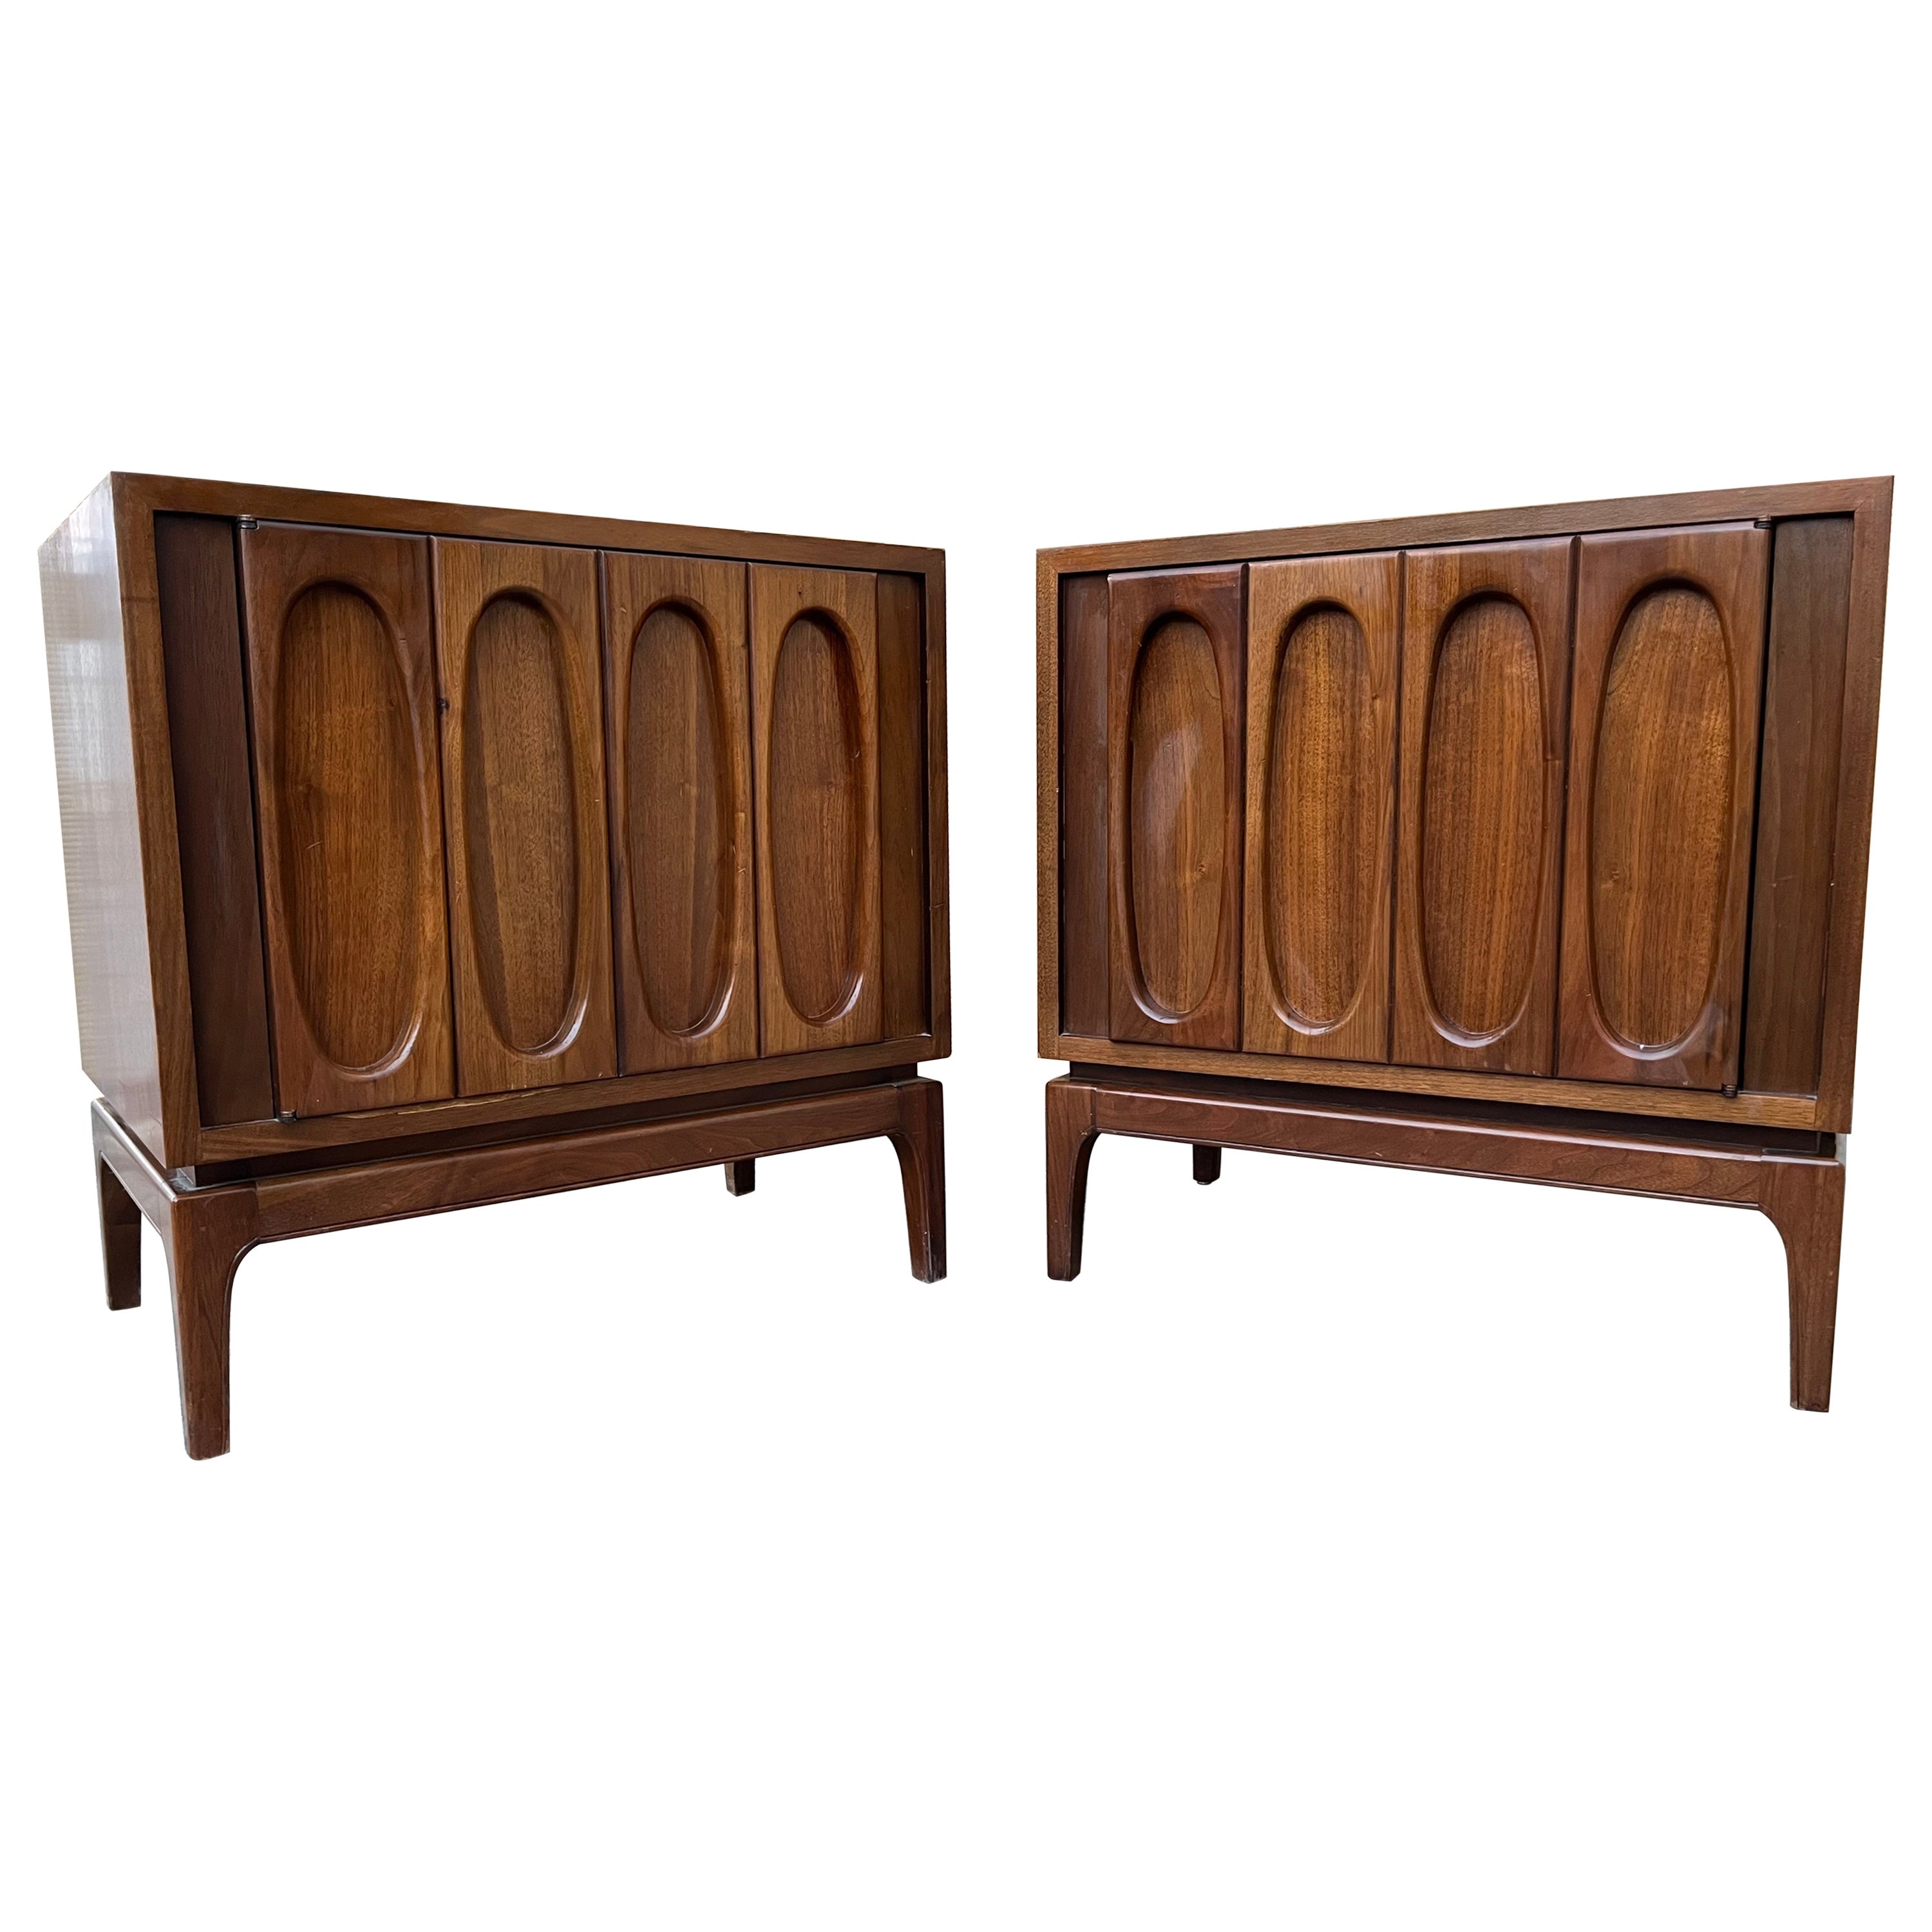 A Pair of Mid Century Modern Brutalist Inspired Nightstands. Circa 1960s.